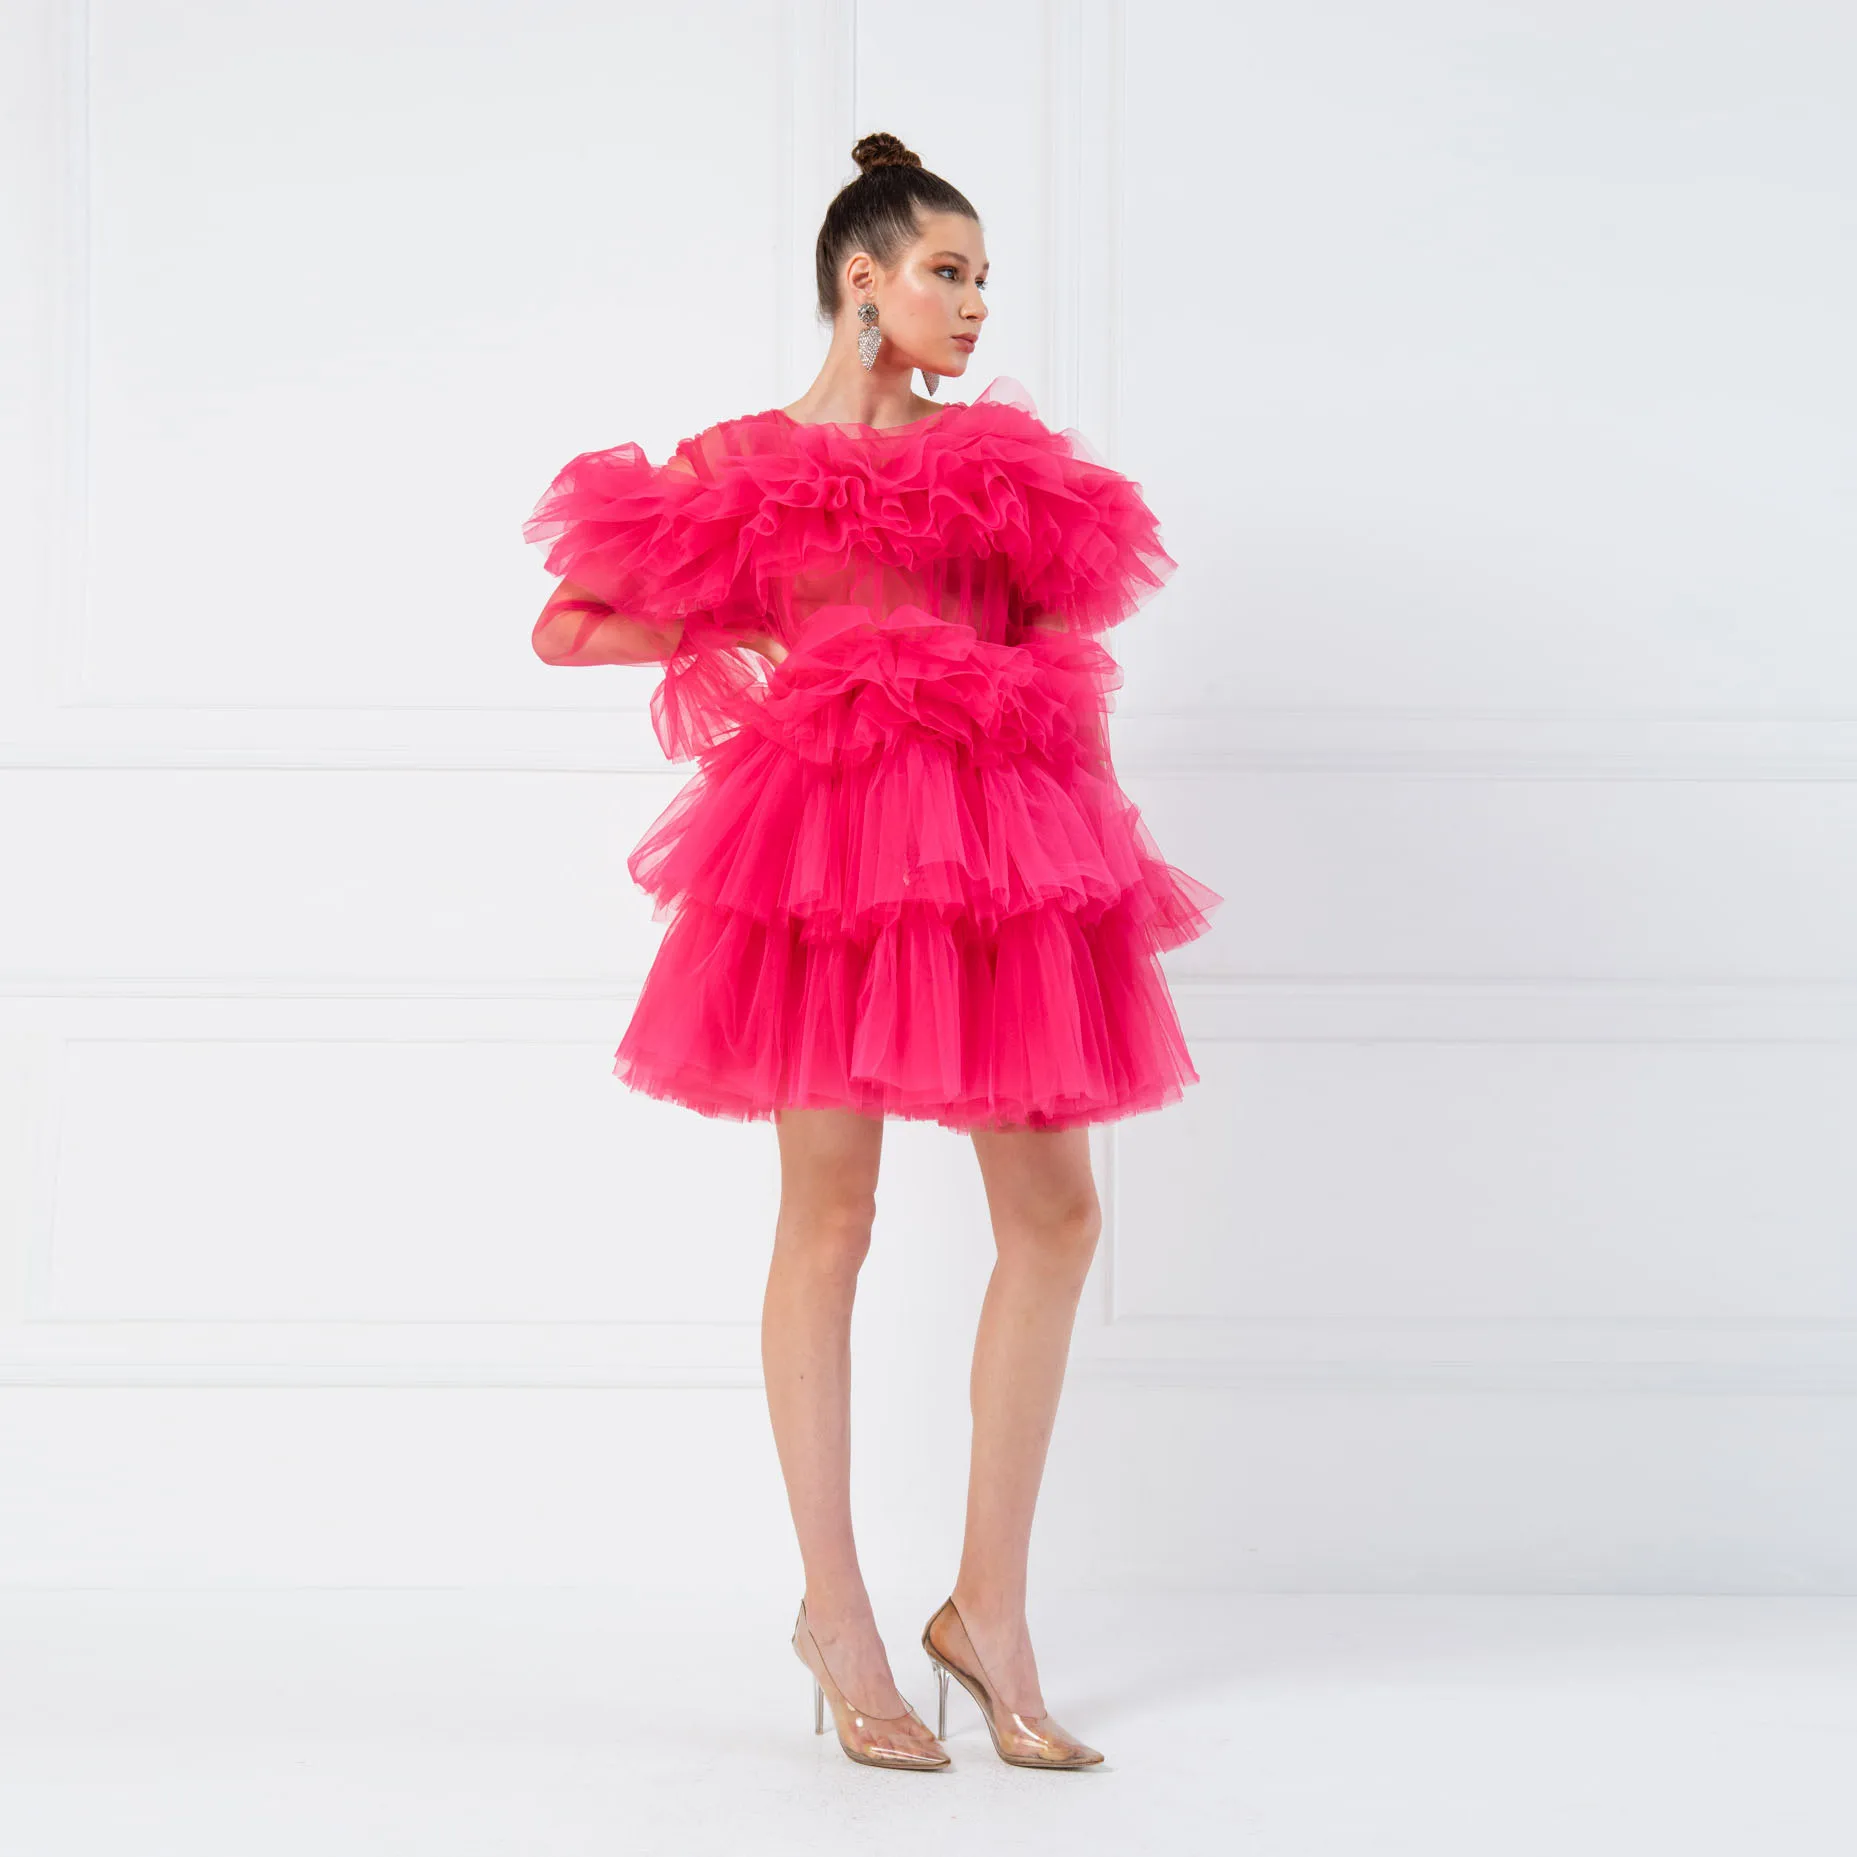 Hot Pink Tiered Tulle Maxi Dresses Women To Birthday Party See Thru Full Sleeves Puffy A-line Tulle Dress Female Clothing